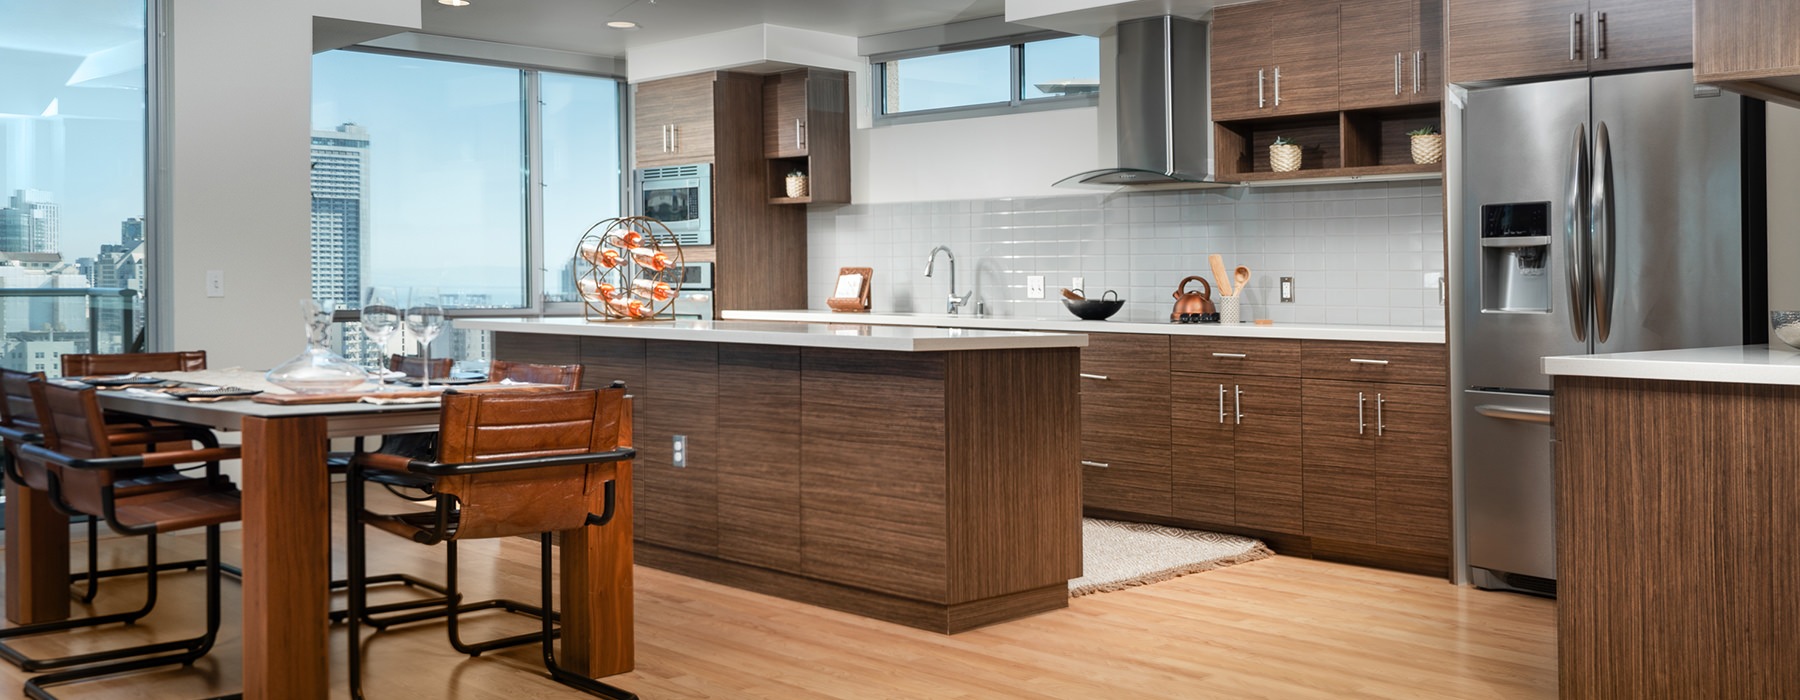 Apartments for Rent in San Francisco CA - Etta Fully-Equipped Kitchen with a Kitchen Island, Stainless Steel Appliances, and Many More Amazing Kitchen Amenities